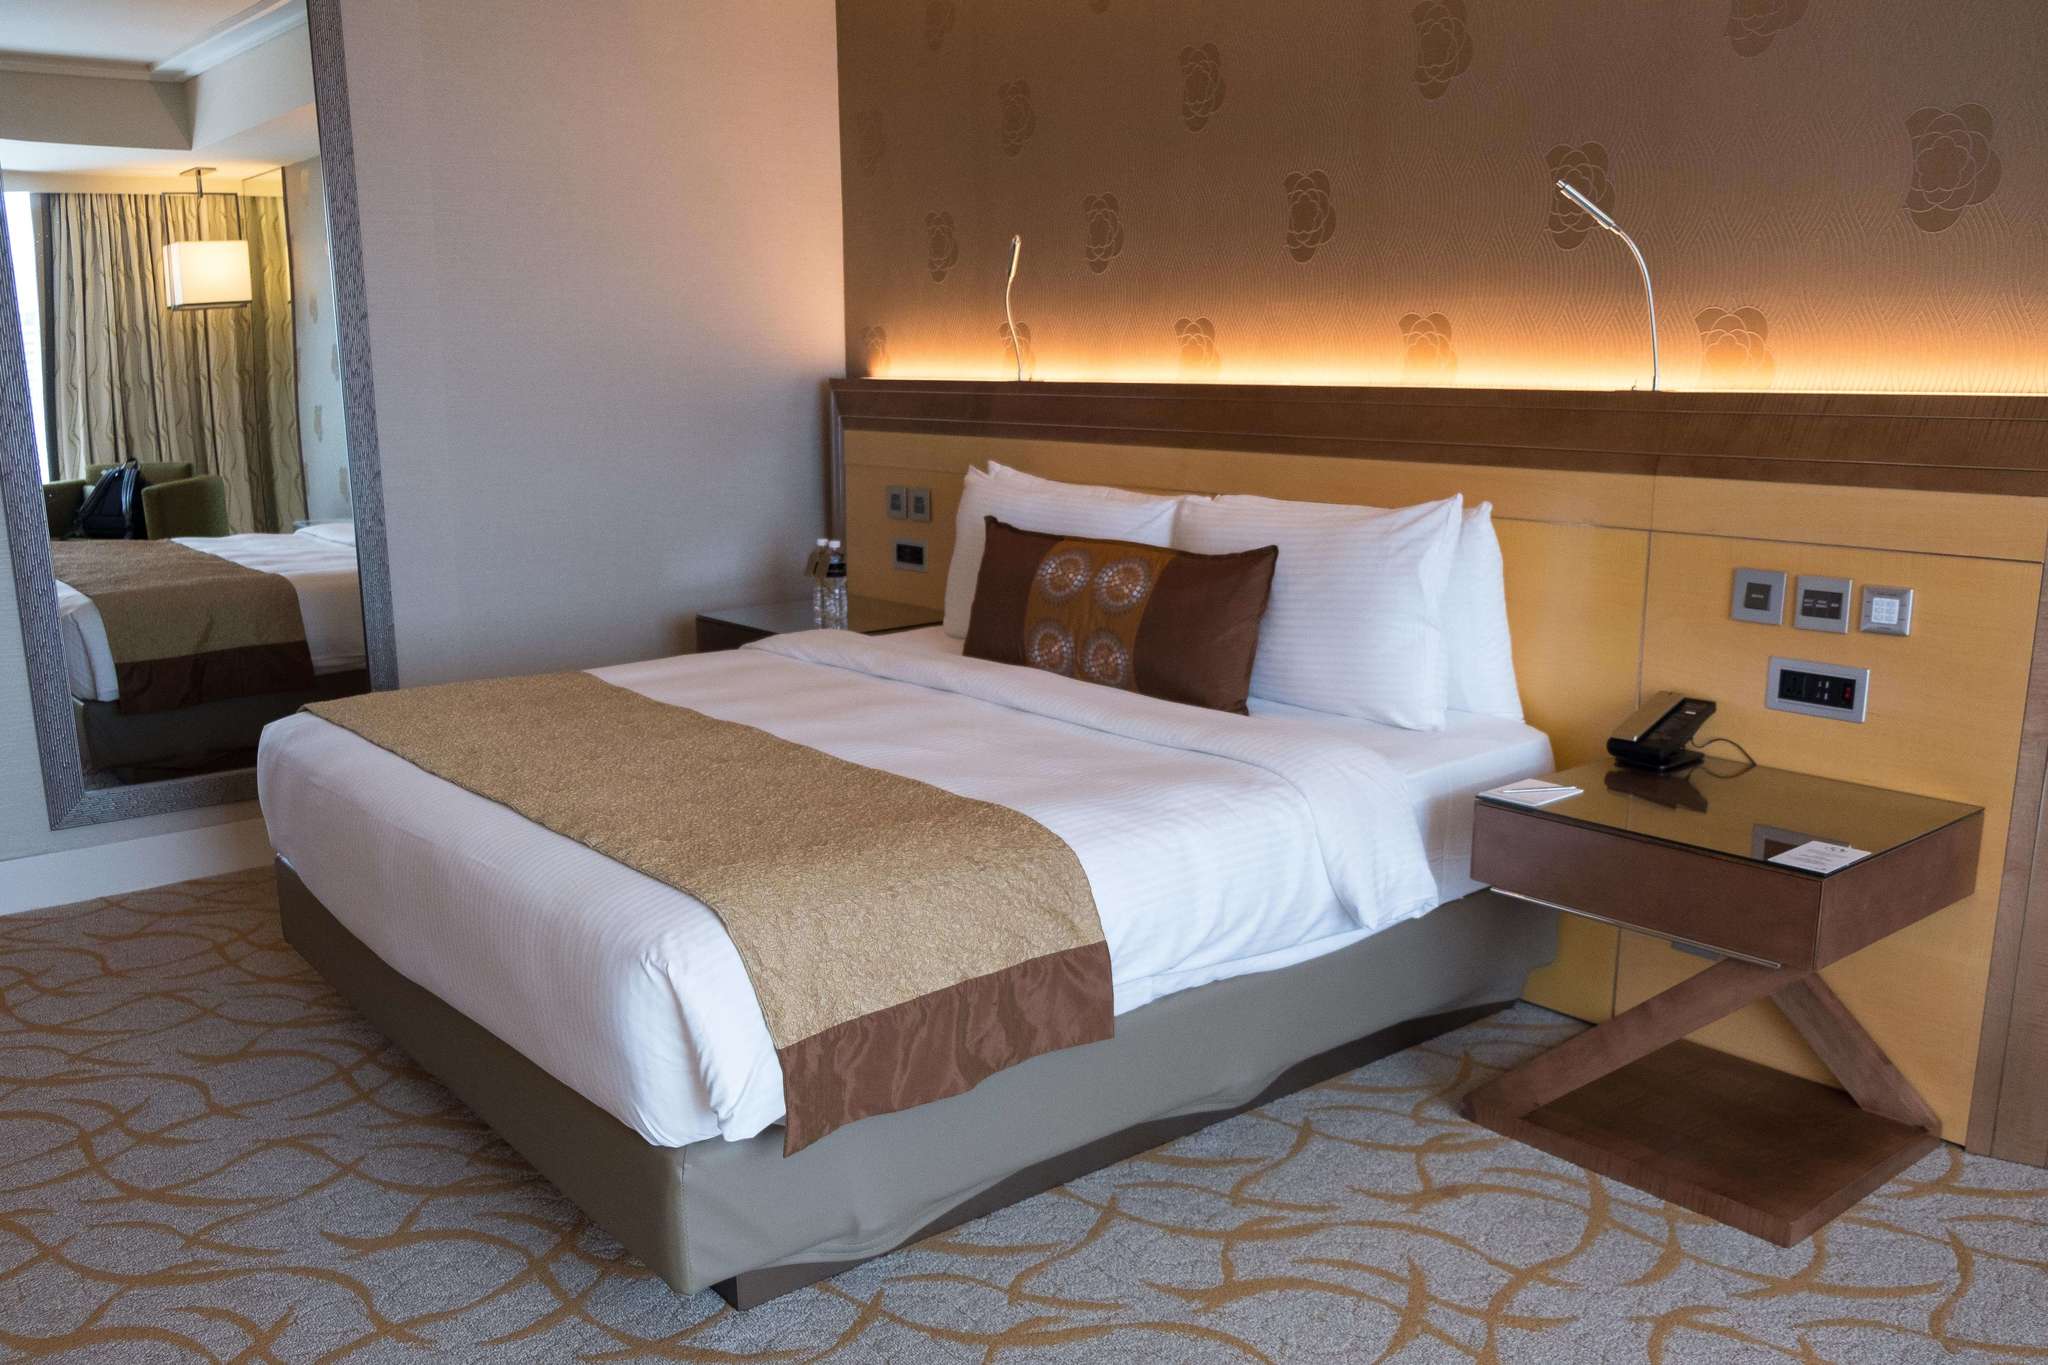 Deluxe Rooms at Marina Bay Sands